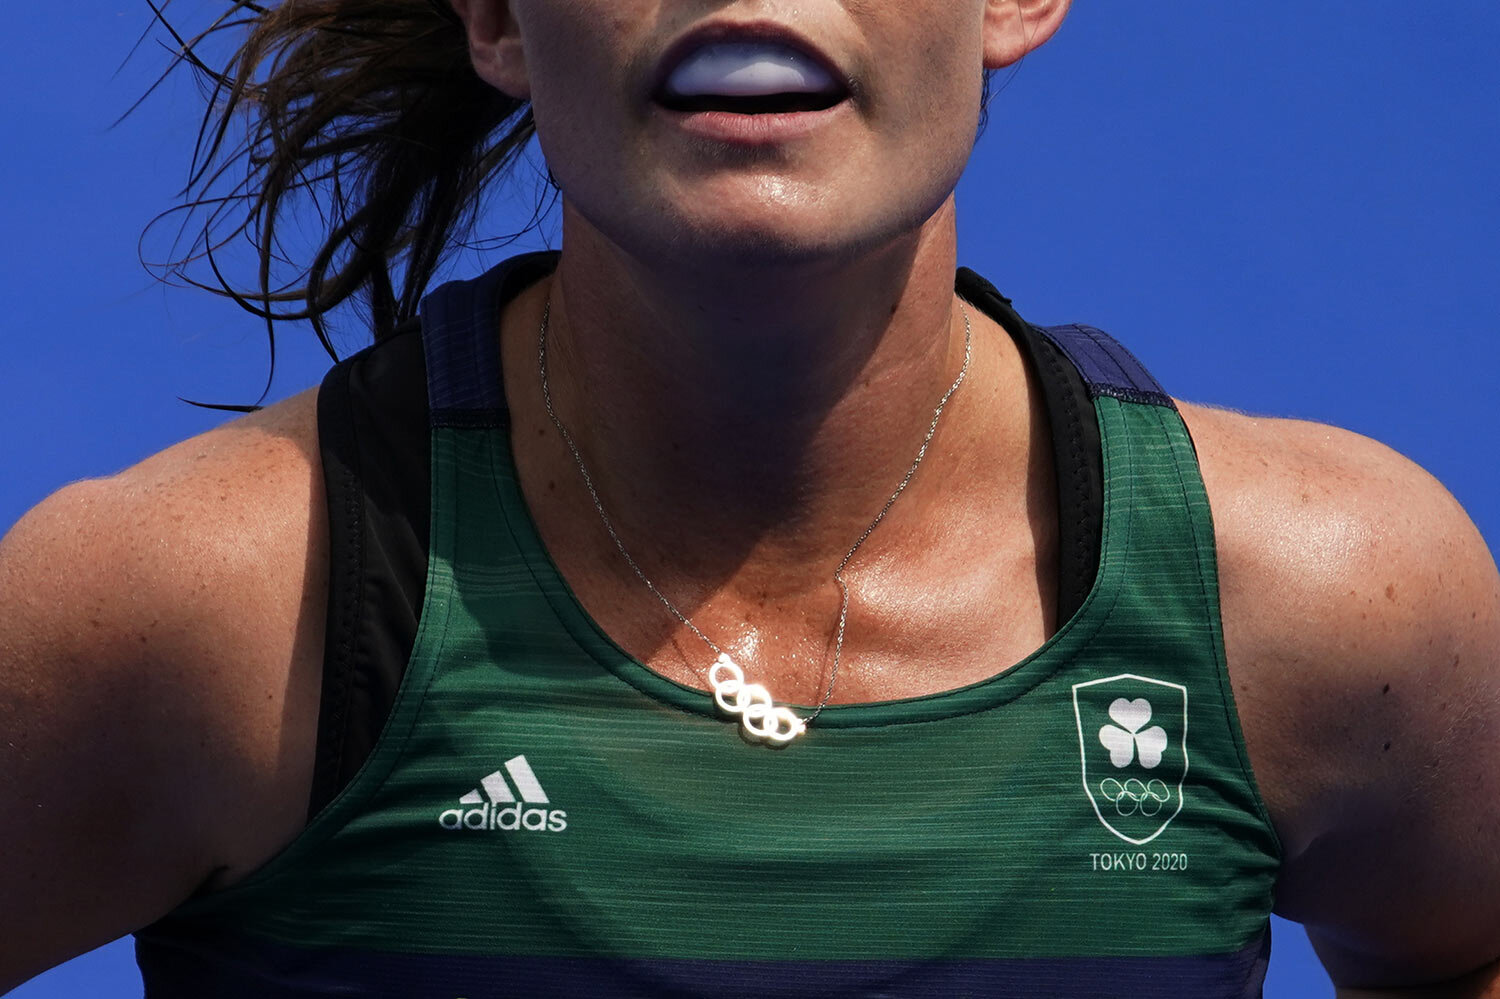  Ireland midfield Lizzy Holden (14) wears a necklace with the Olympic Rings during a women's field hockey match against India at the 2020 Summer Olympics, Friday, July 30, 2021, in Tokyo, Japan. (AP Photo/John Locher) 